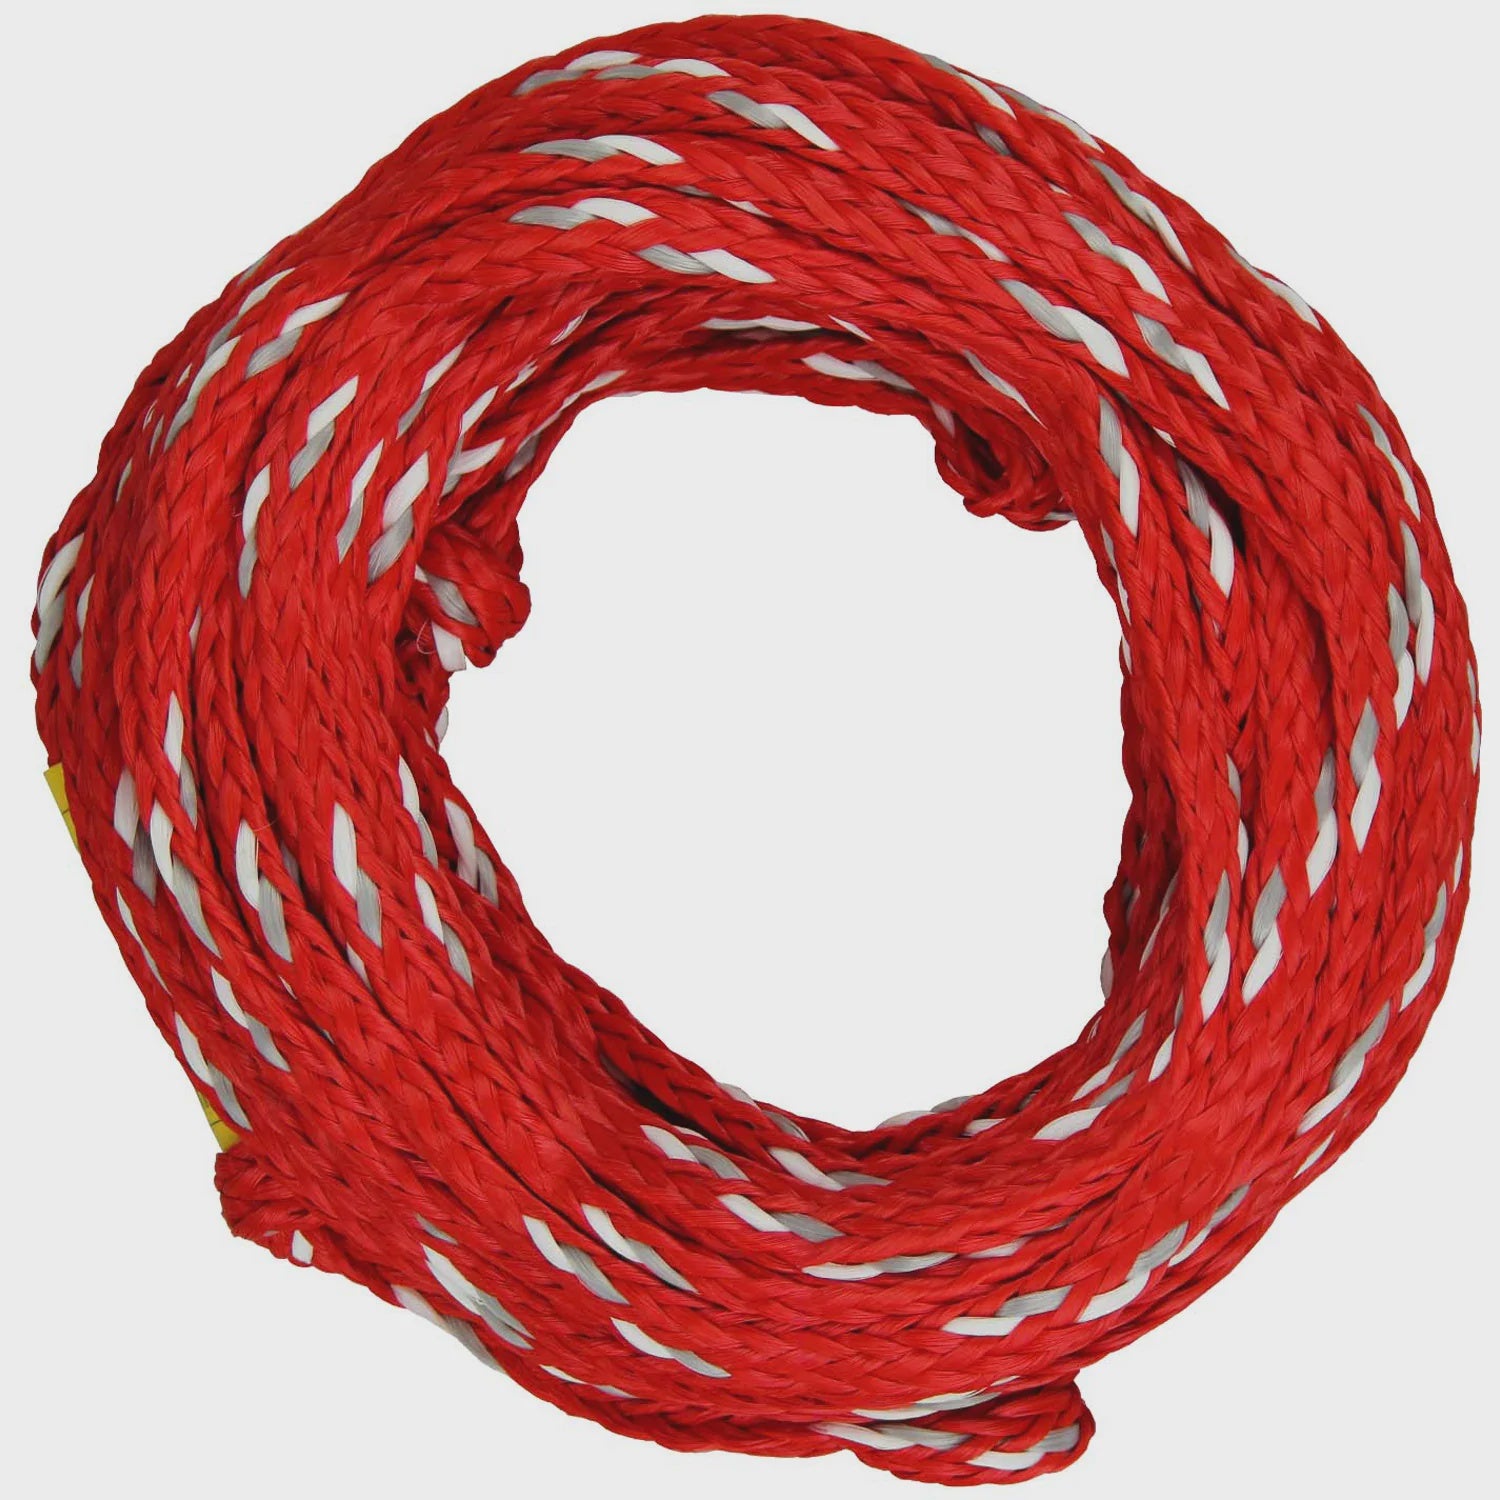 Masterline Tube Rope - Heavy Duty - 4 Person - Red